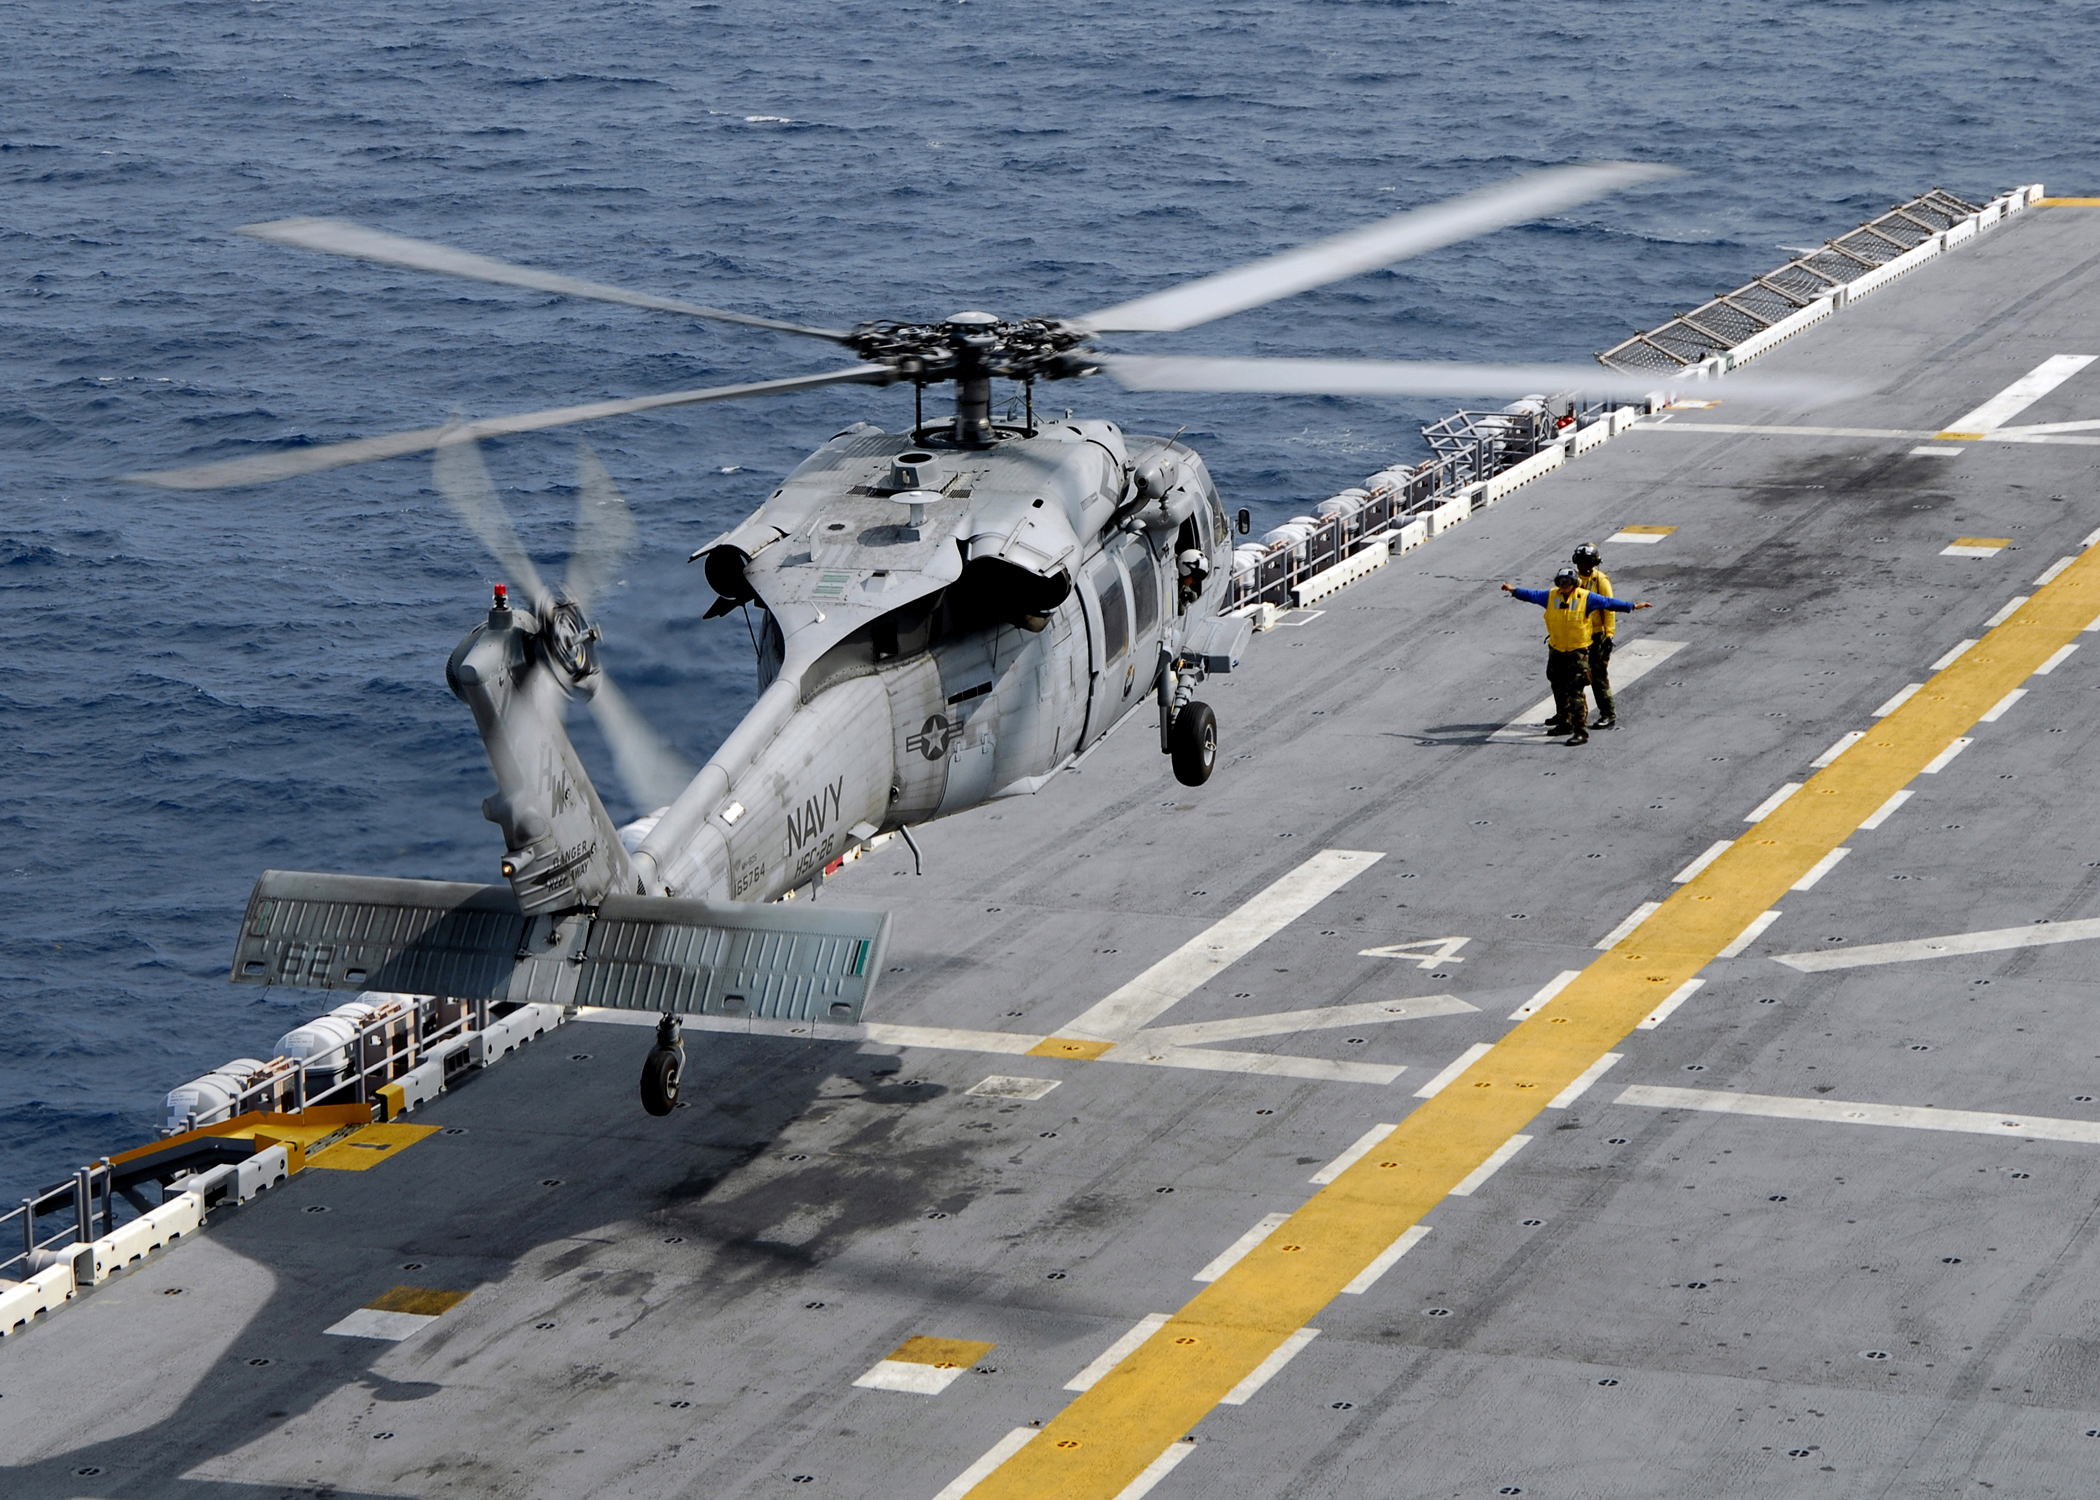 US Navy 080828-N-4236E-589 An MH-60S Sea Hawk helicopter lands on the flight deck of the multi-purpose amphibious assault ship USS Iwo Jima (LHD 7)